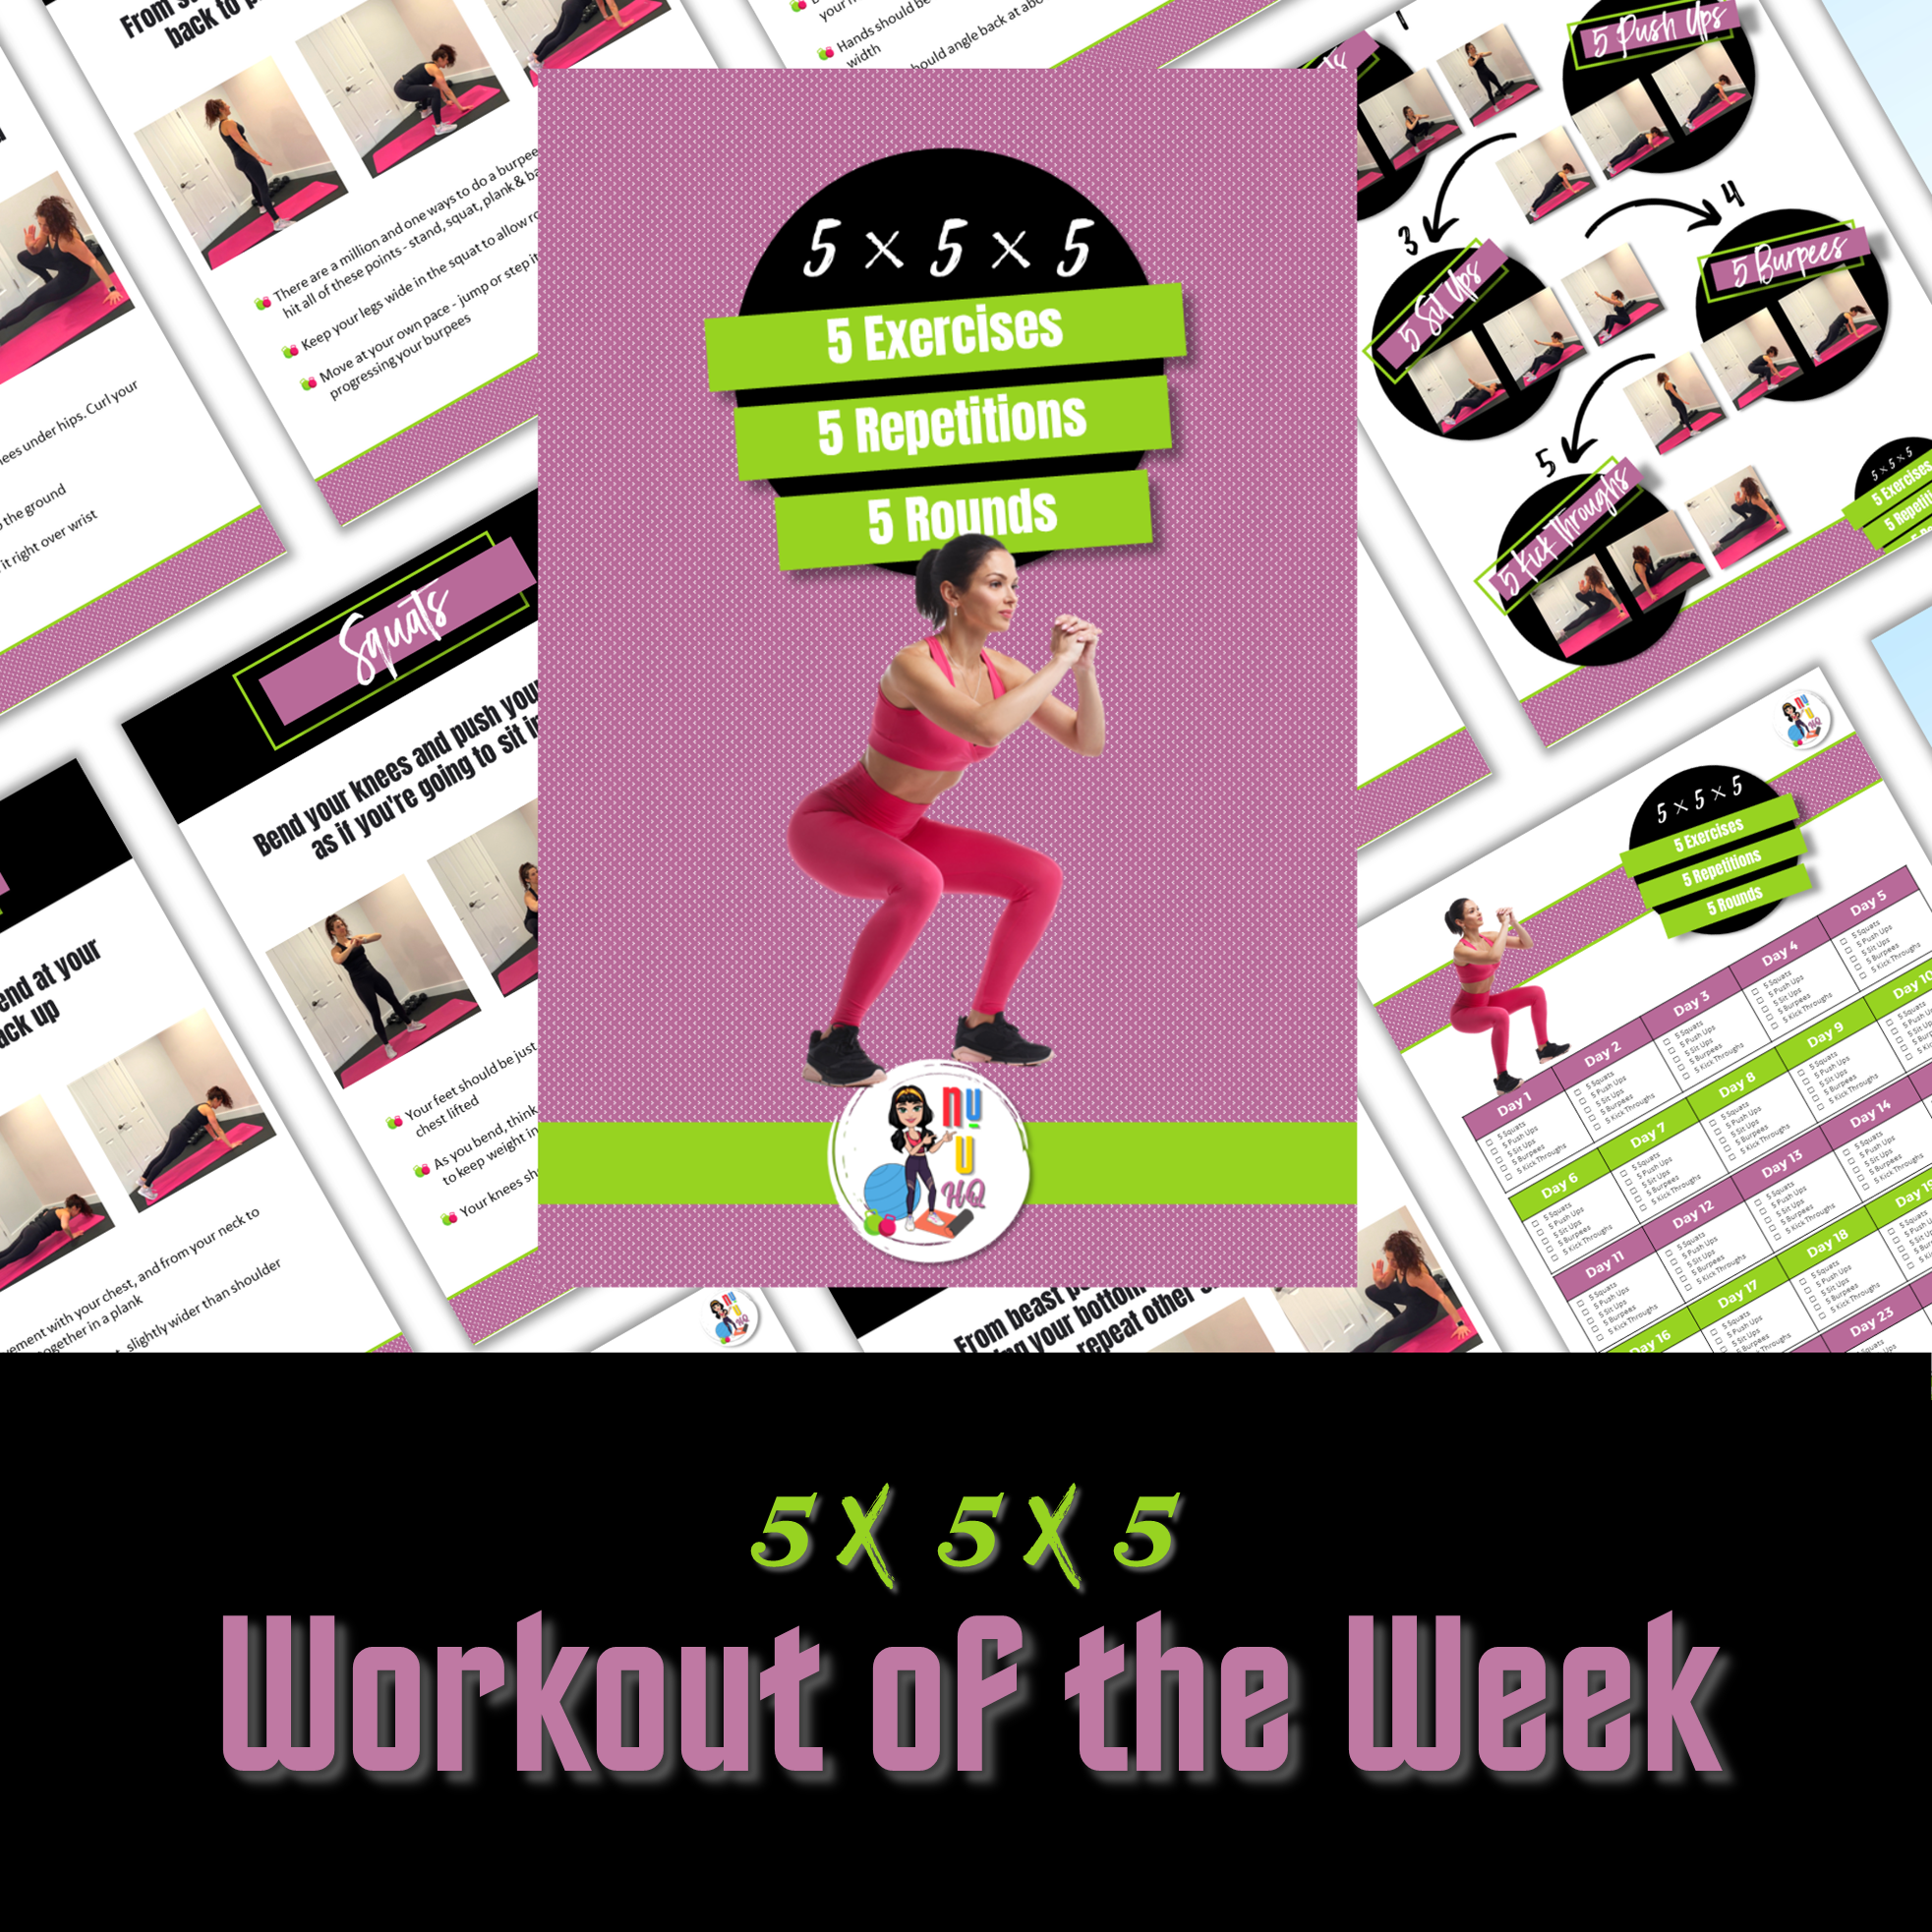 Workout of the week - 5 x 5 x 5